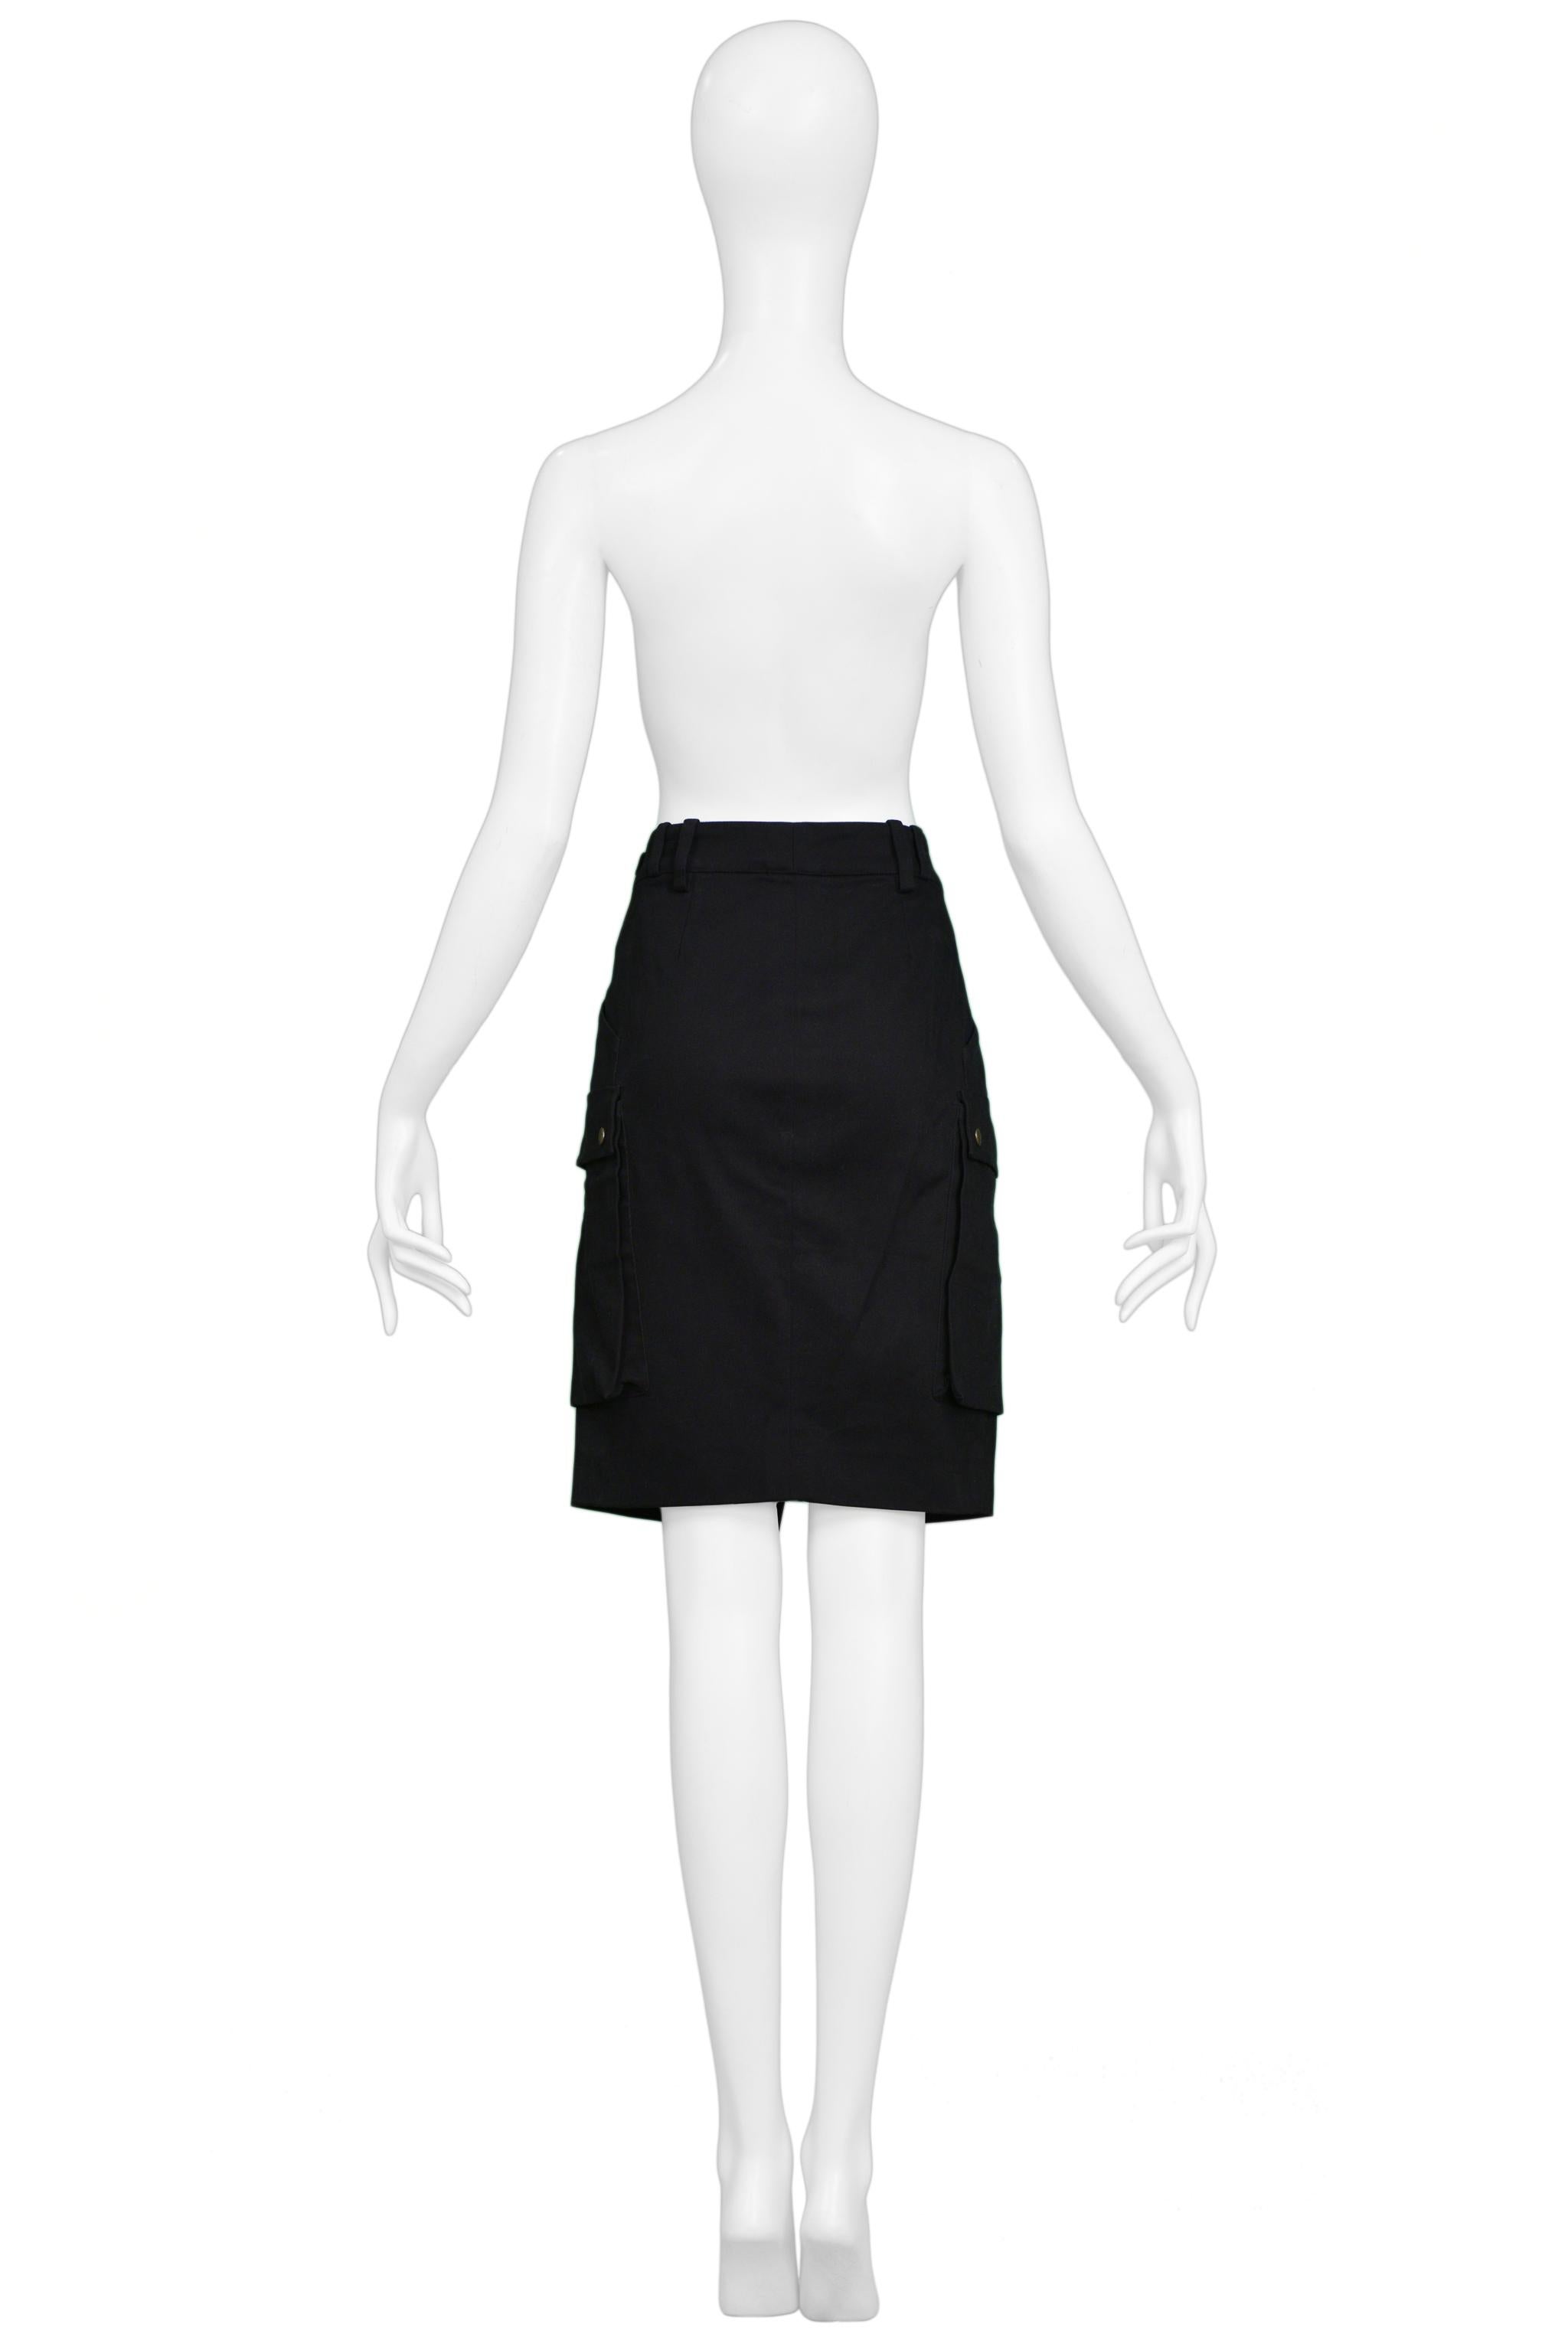 Balenciaga By Ghesquiere Black Cargo Skirt 2002 In Excellent Condition For Sale In Los Angeles, CA